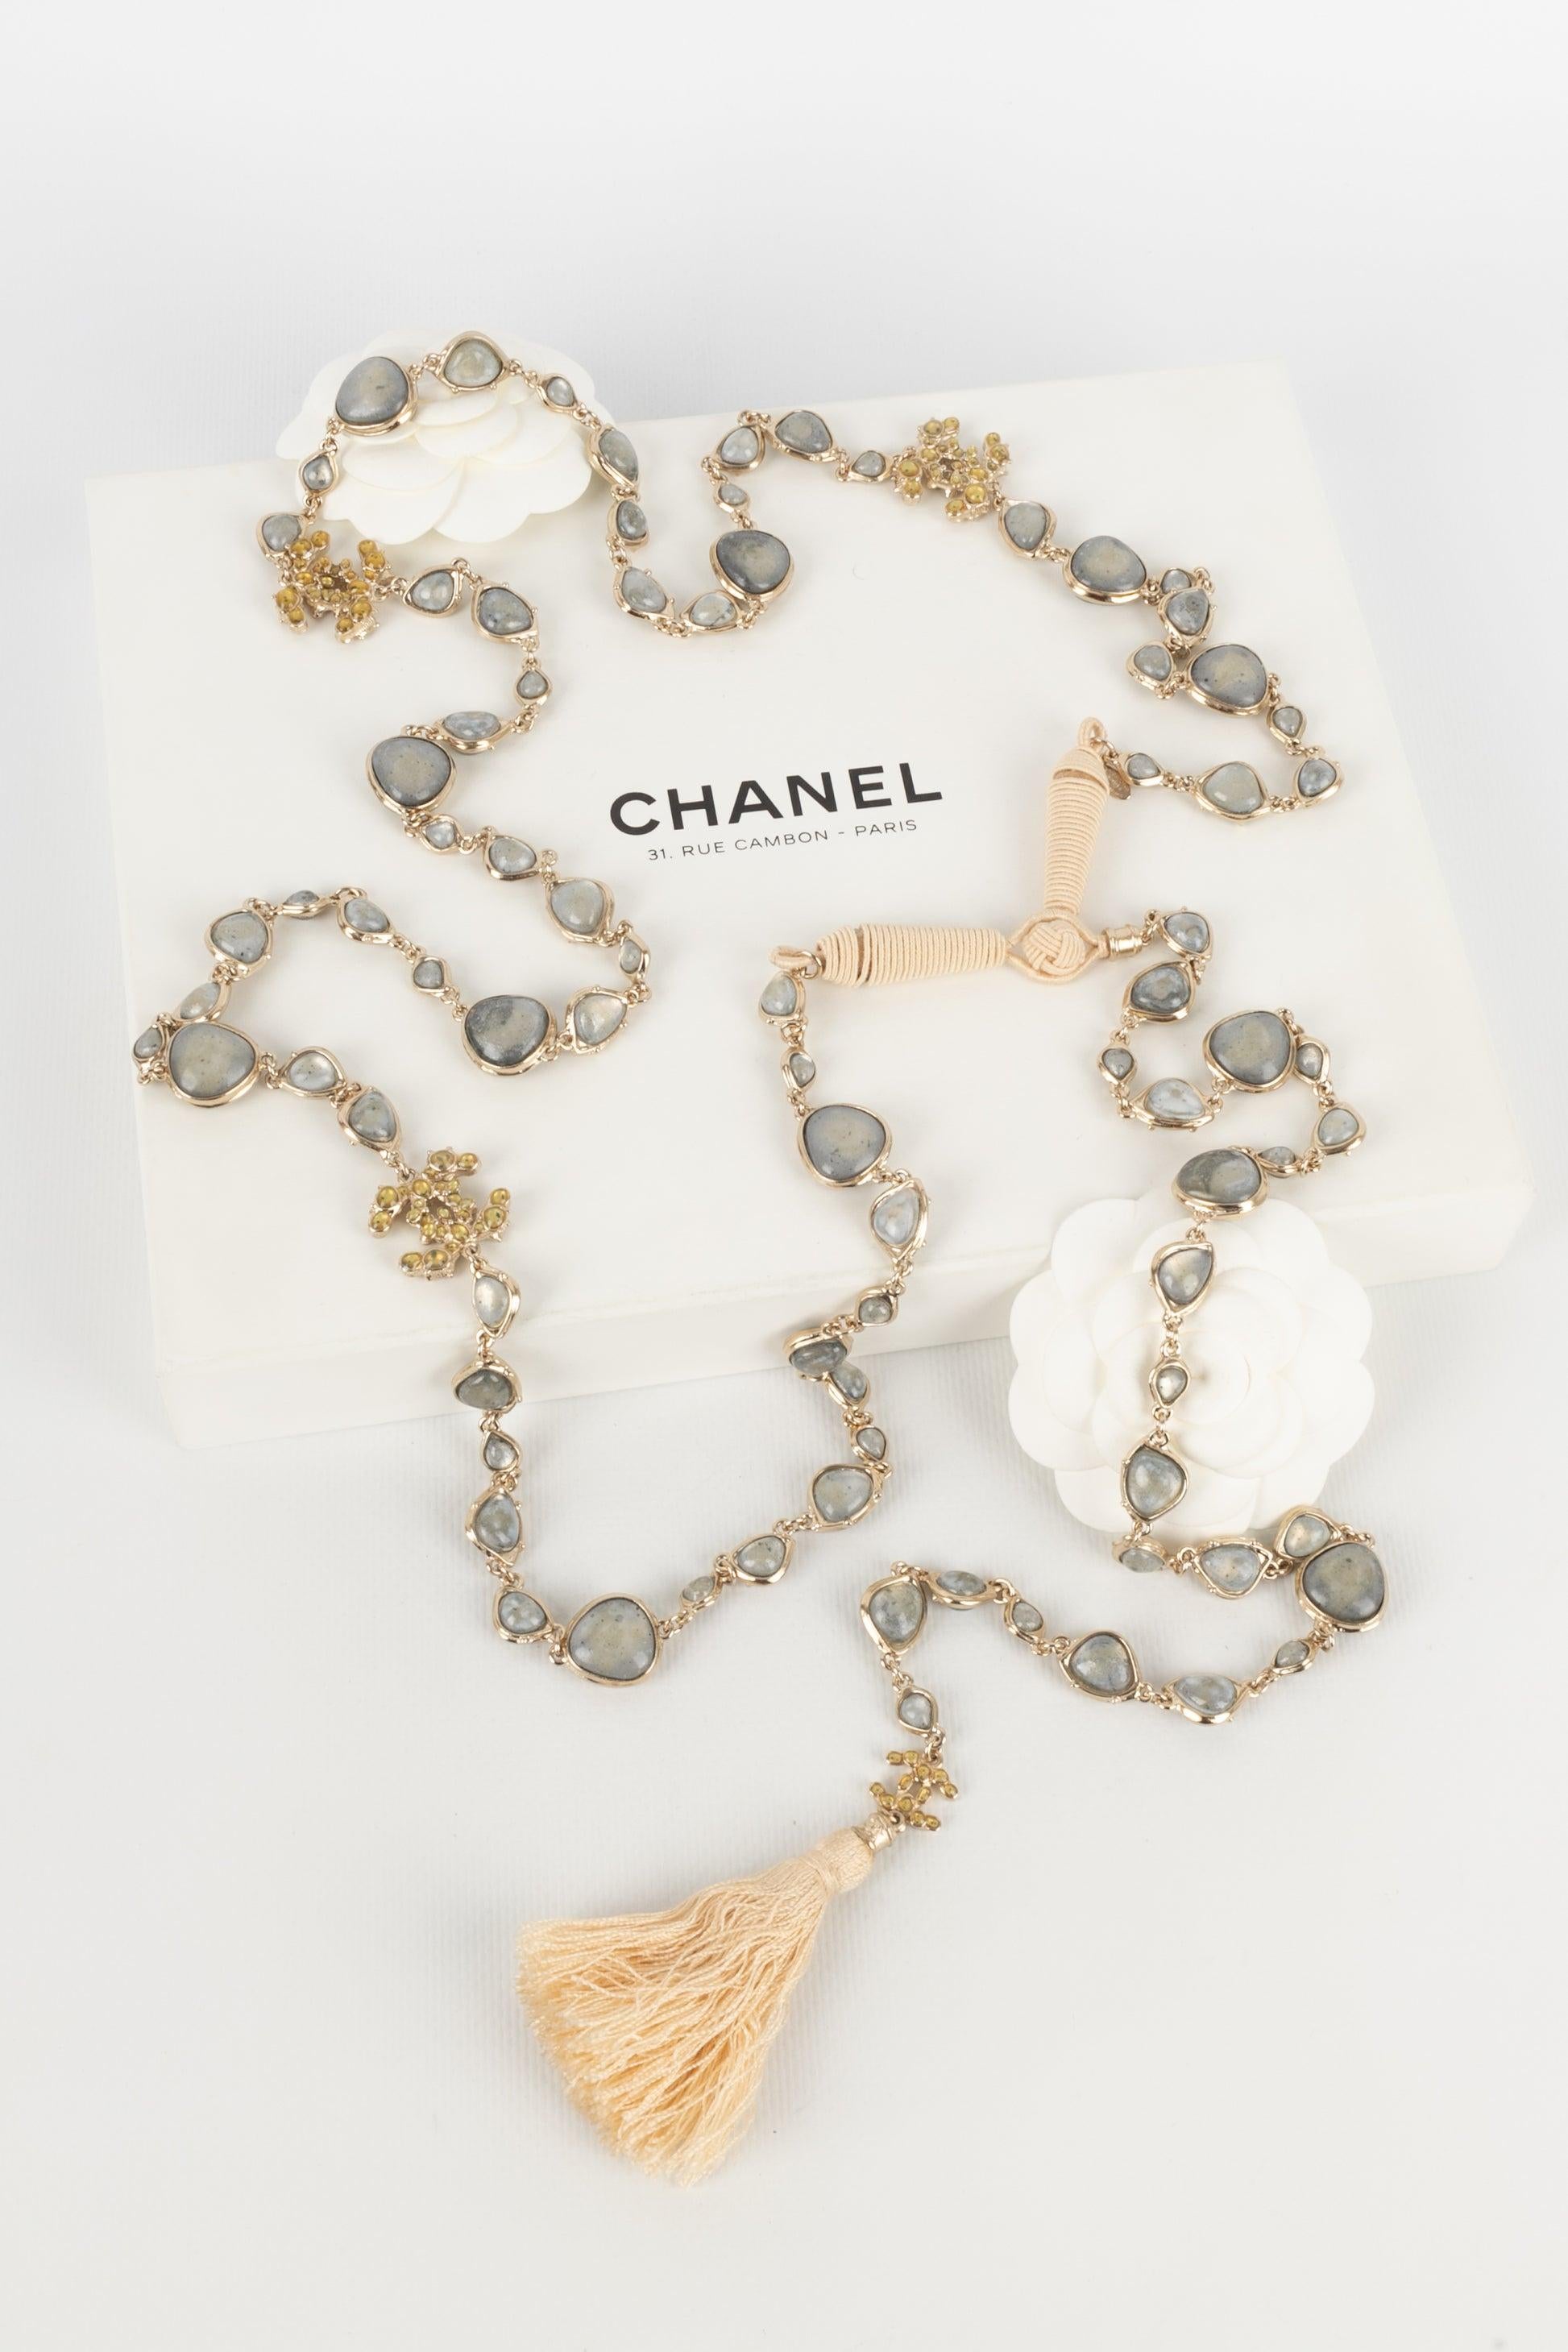 Chanel Champagne Metal Tie Necklace, 2012 8